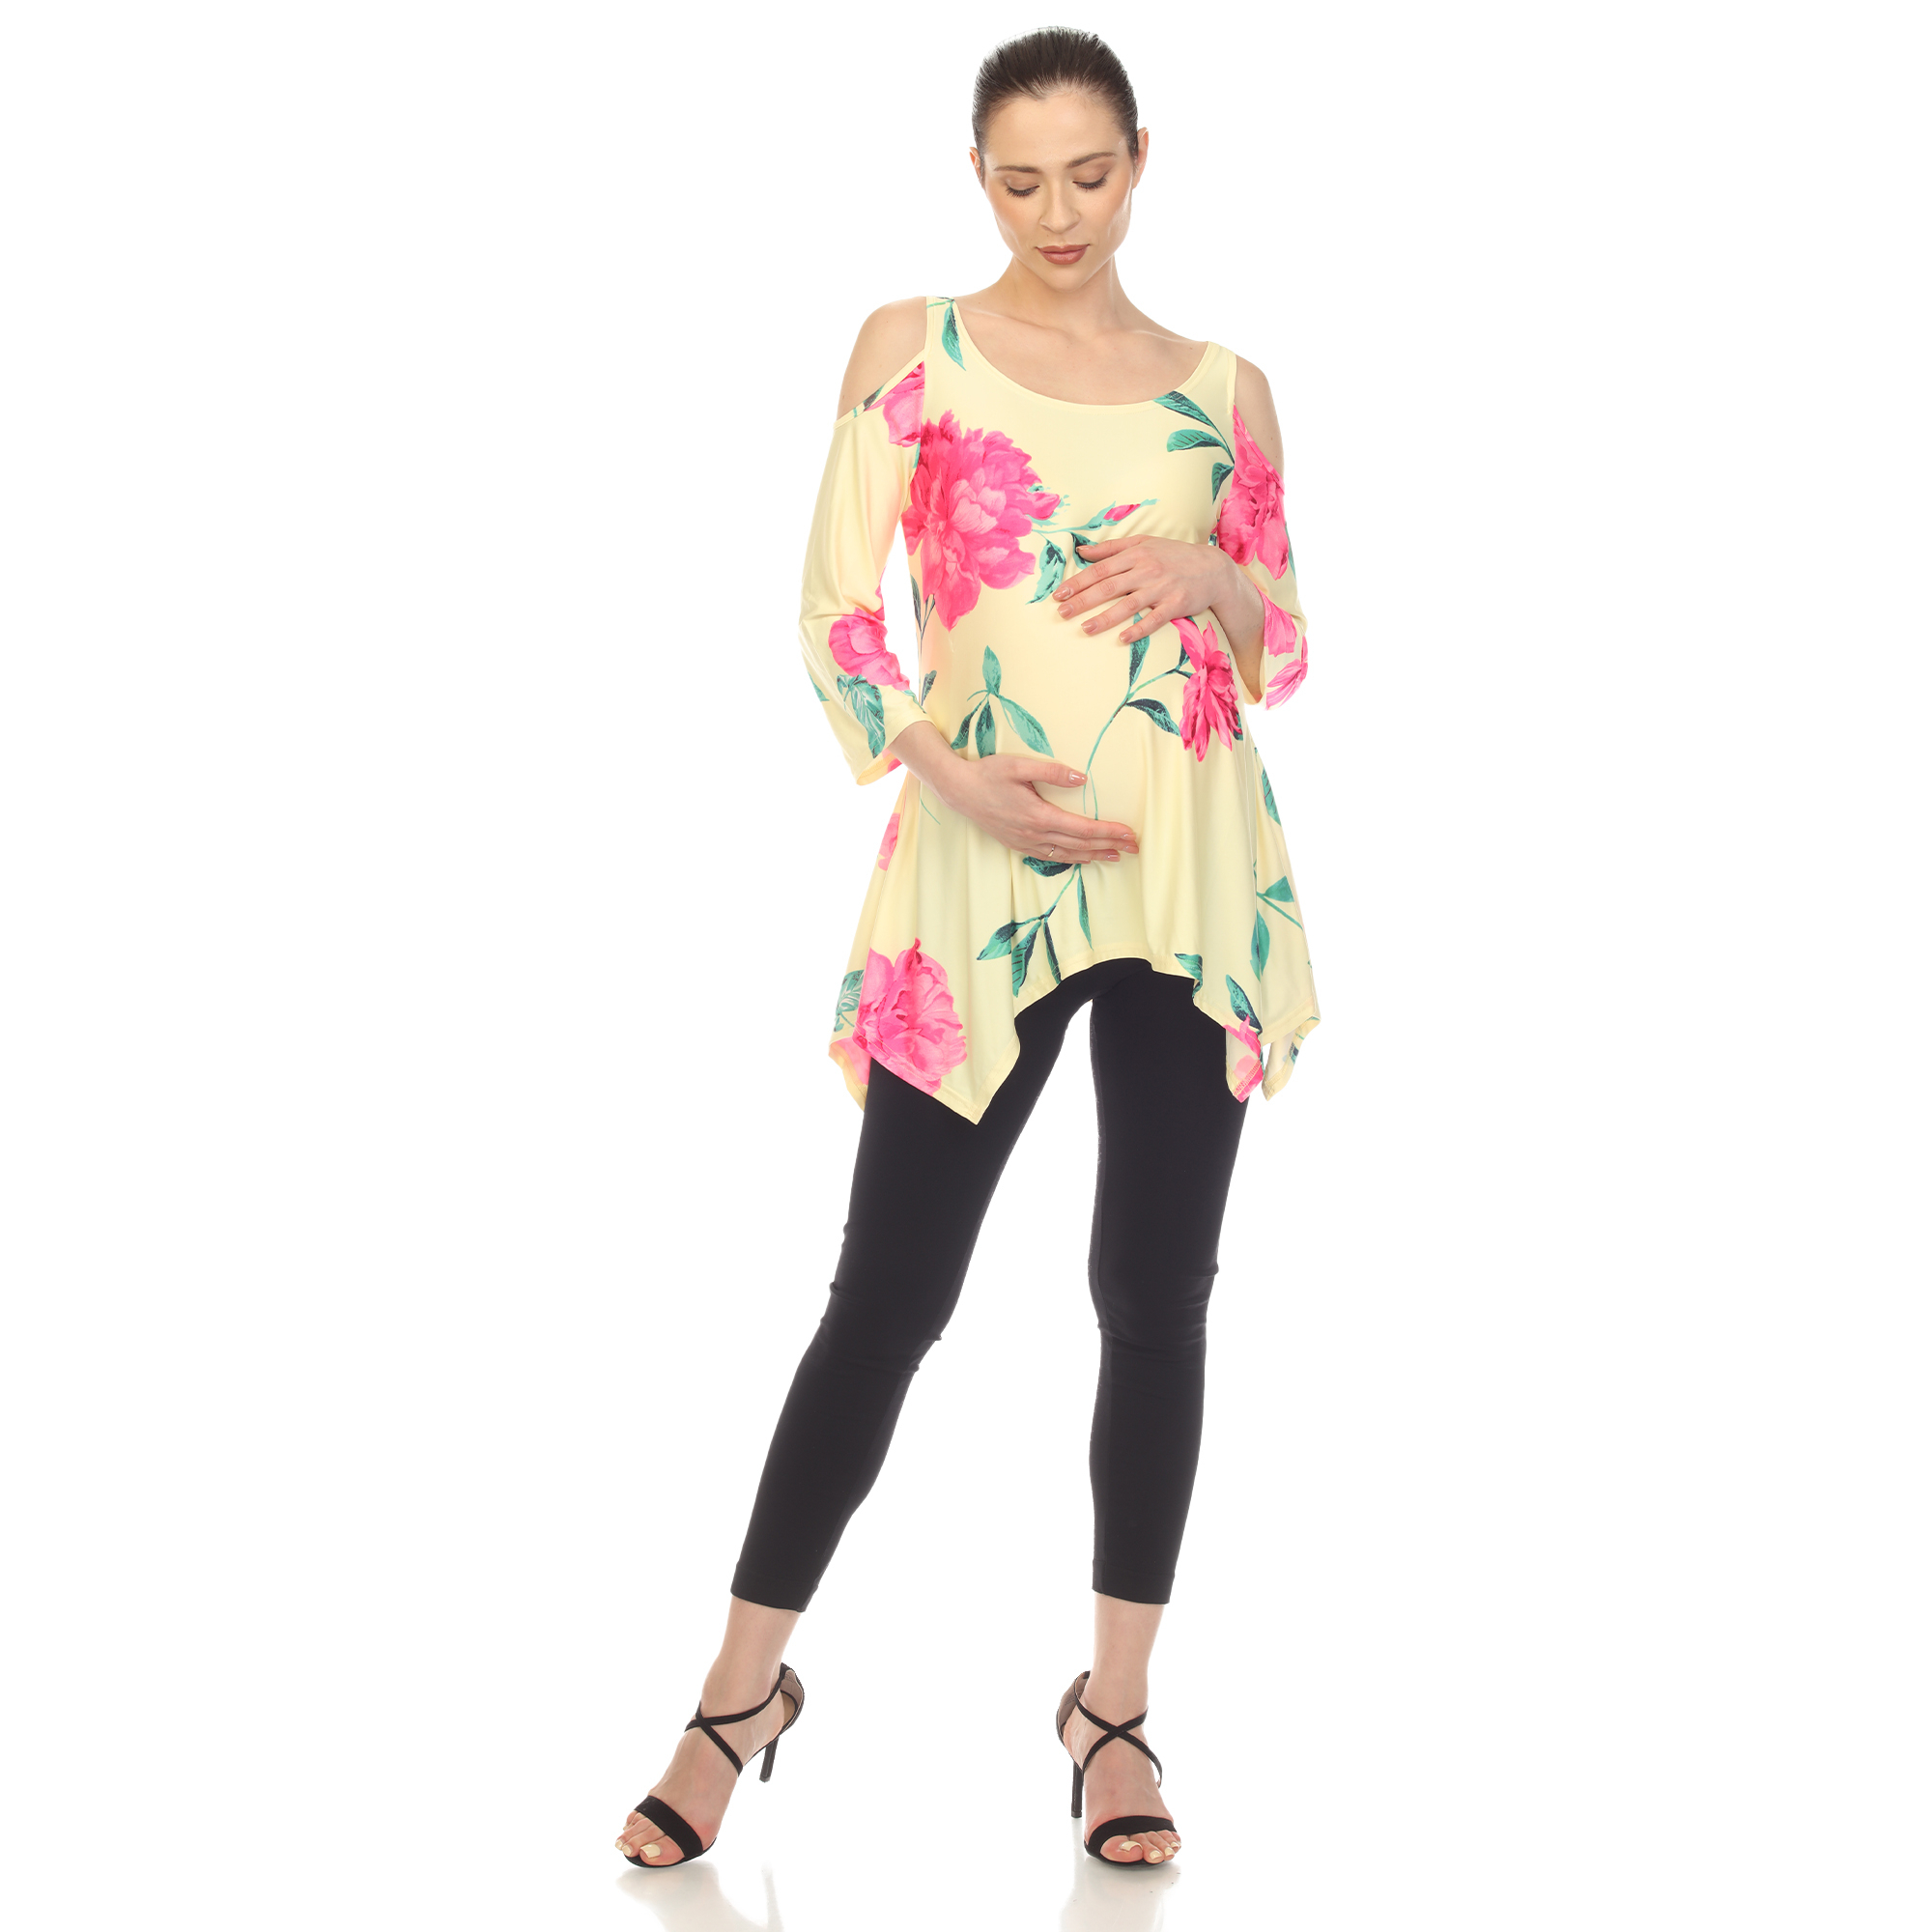 White Mark Women's Maternity Floral Cold Shoulder Tunic Top - Yellow/Pink, 3X